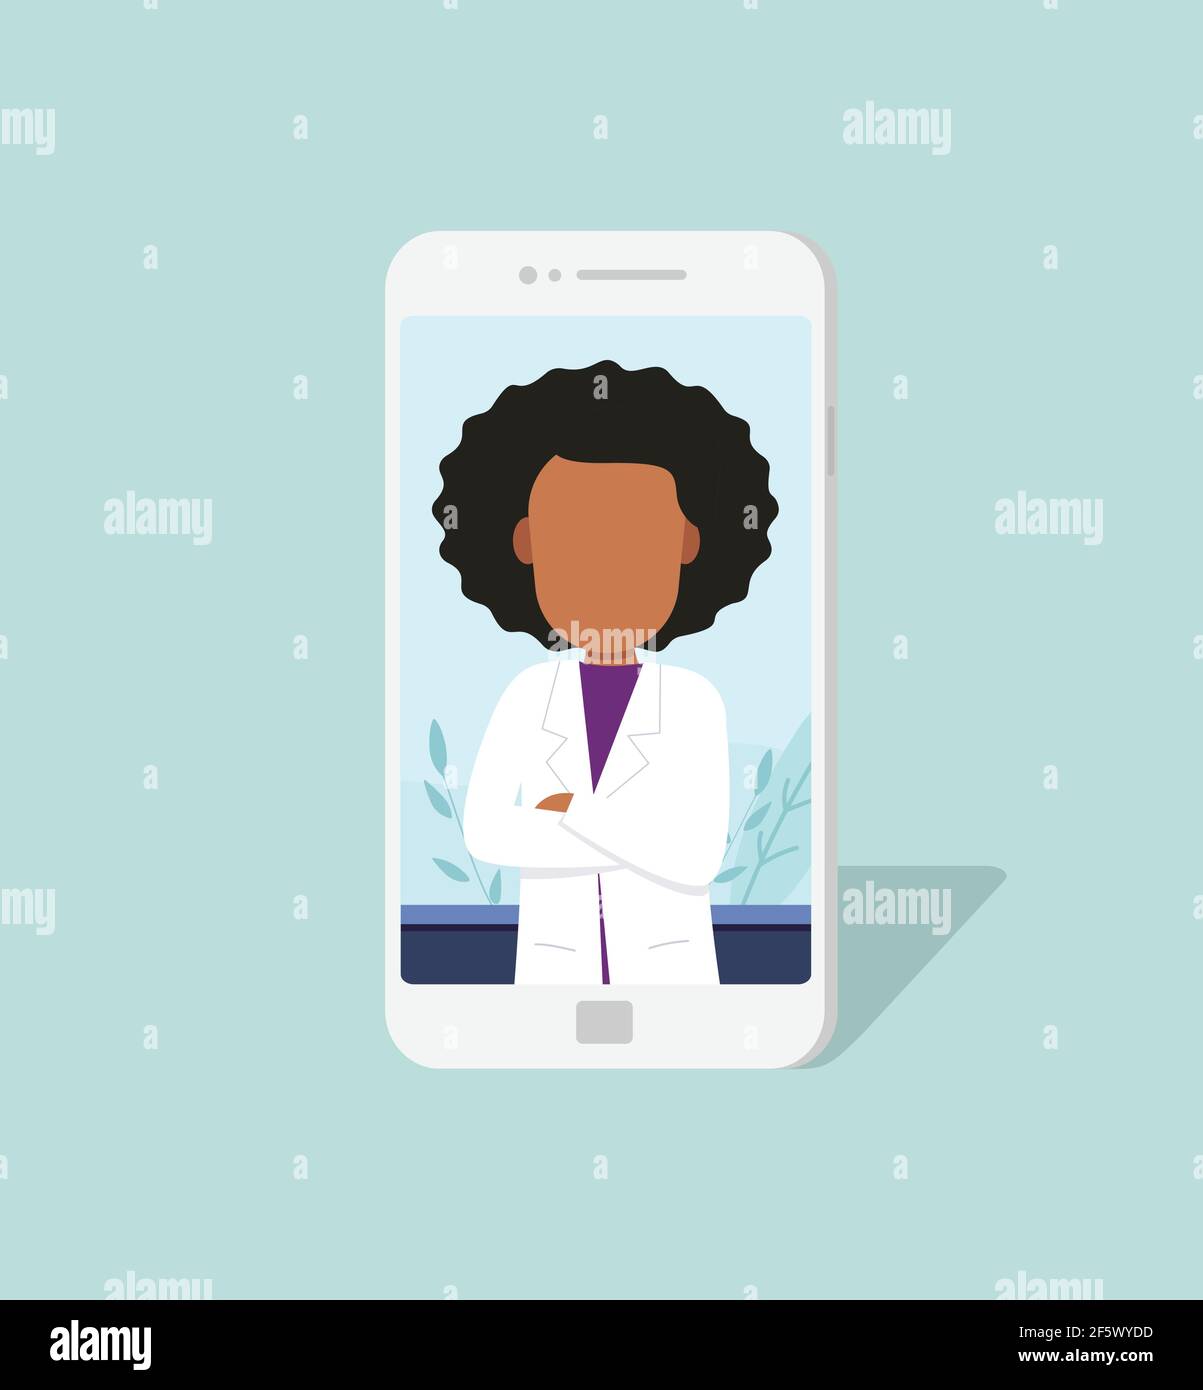 Cellphone screen with black woman doctor online. Medicine and telemedicine concept. Vector flat person illustration. Stock Vector